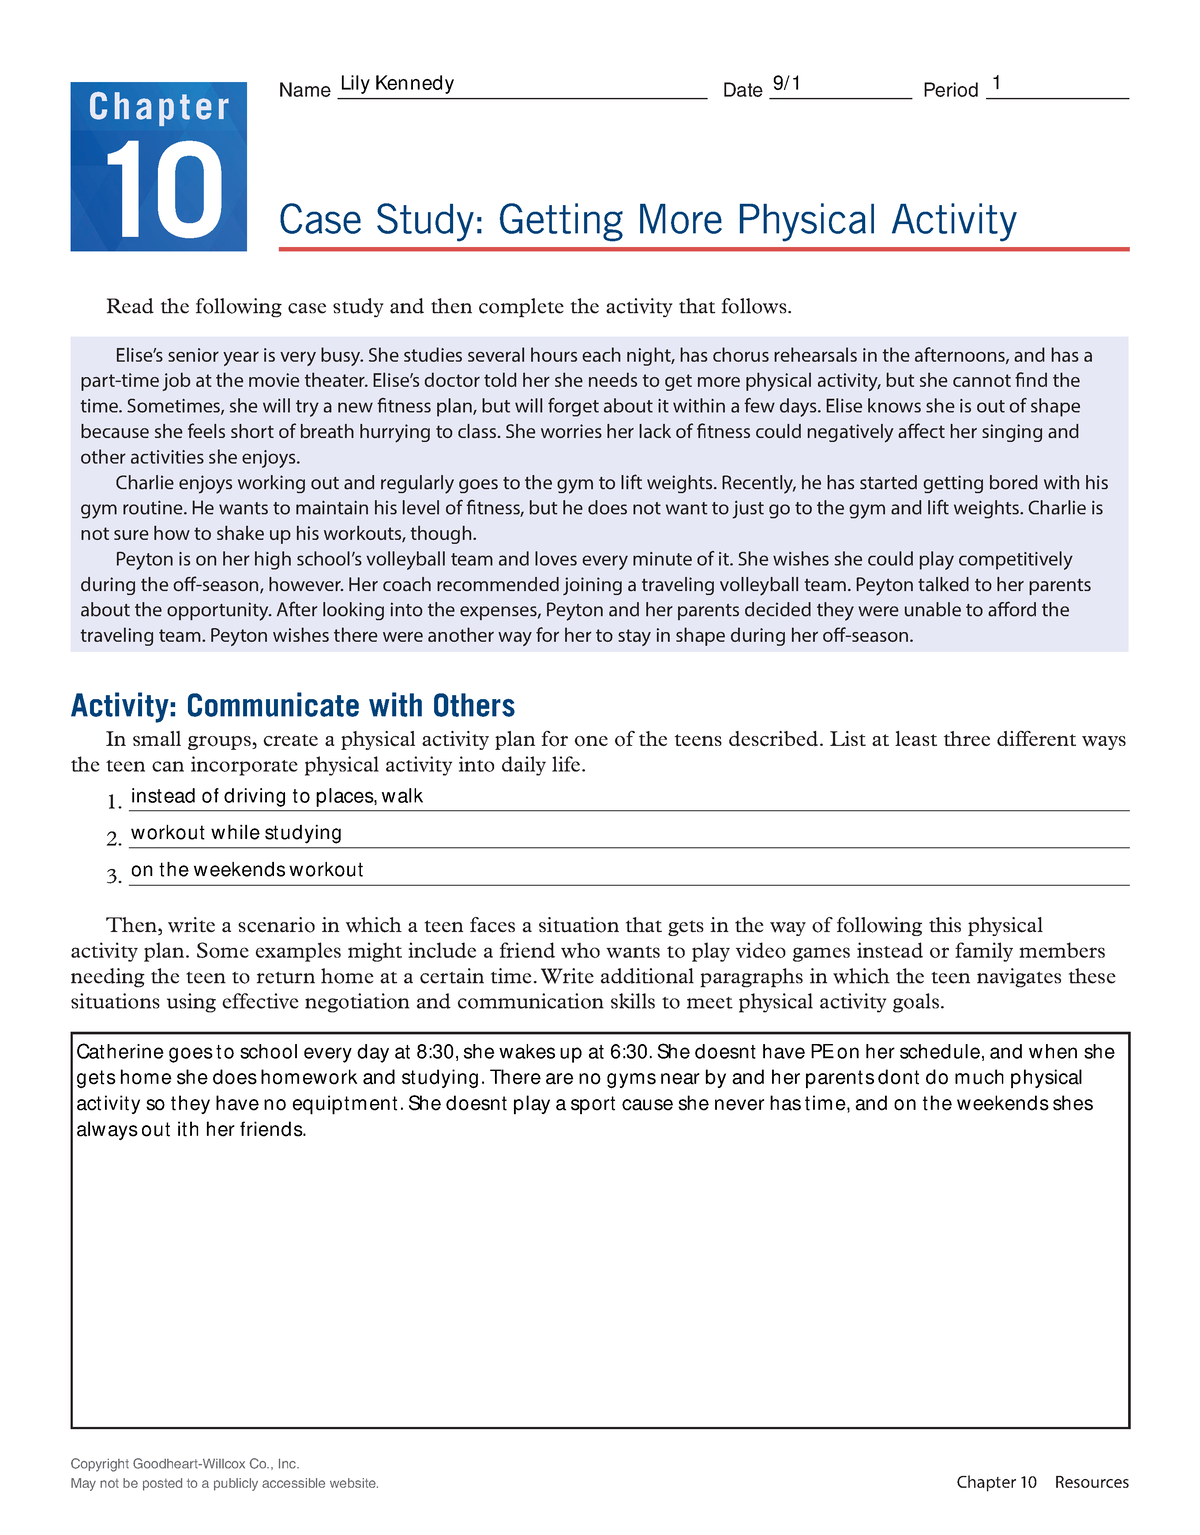 case study on physical activity